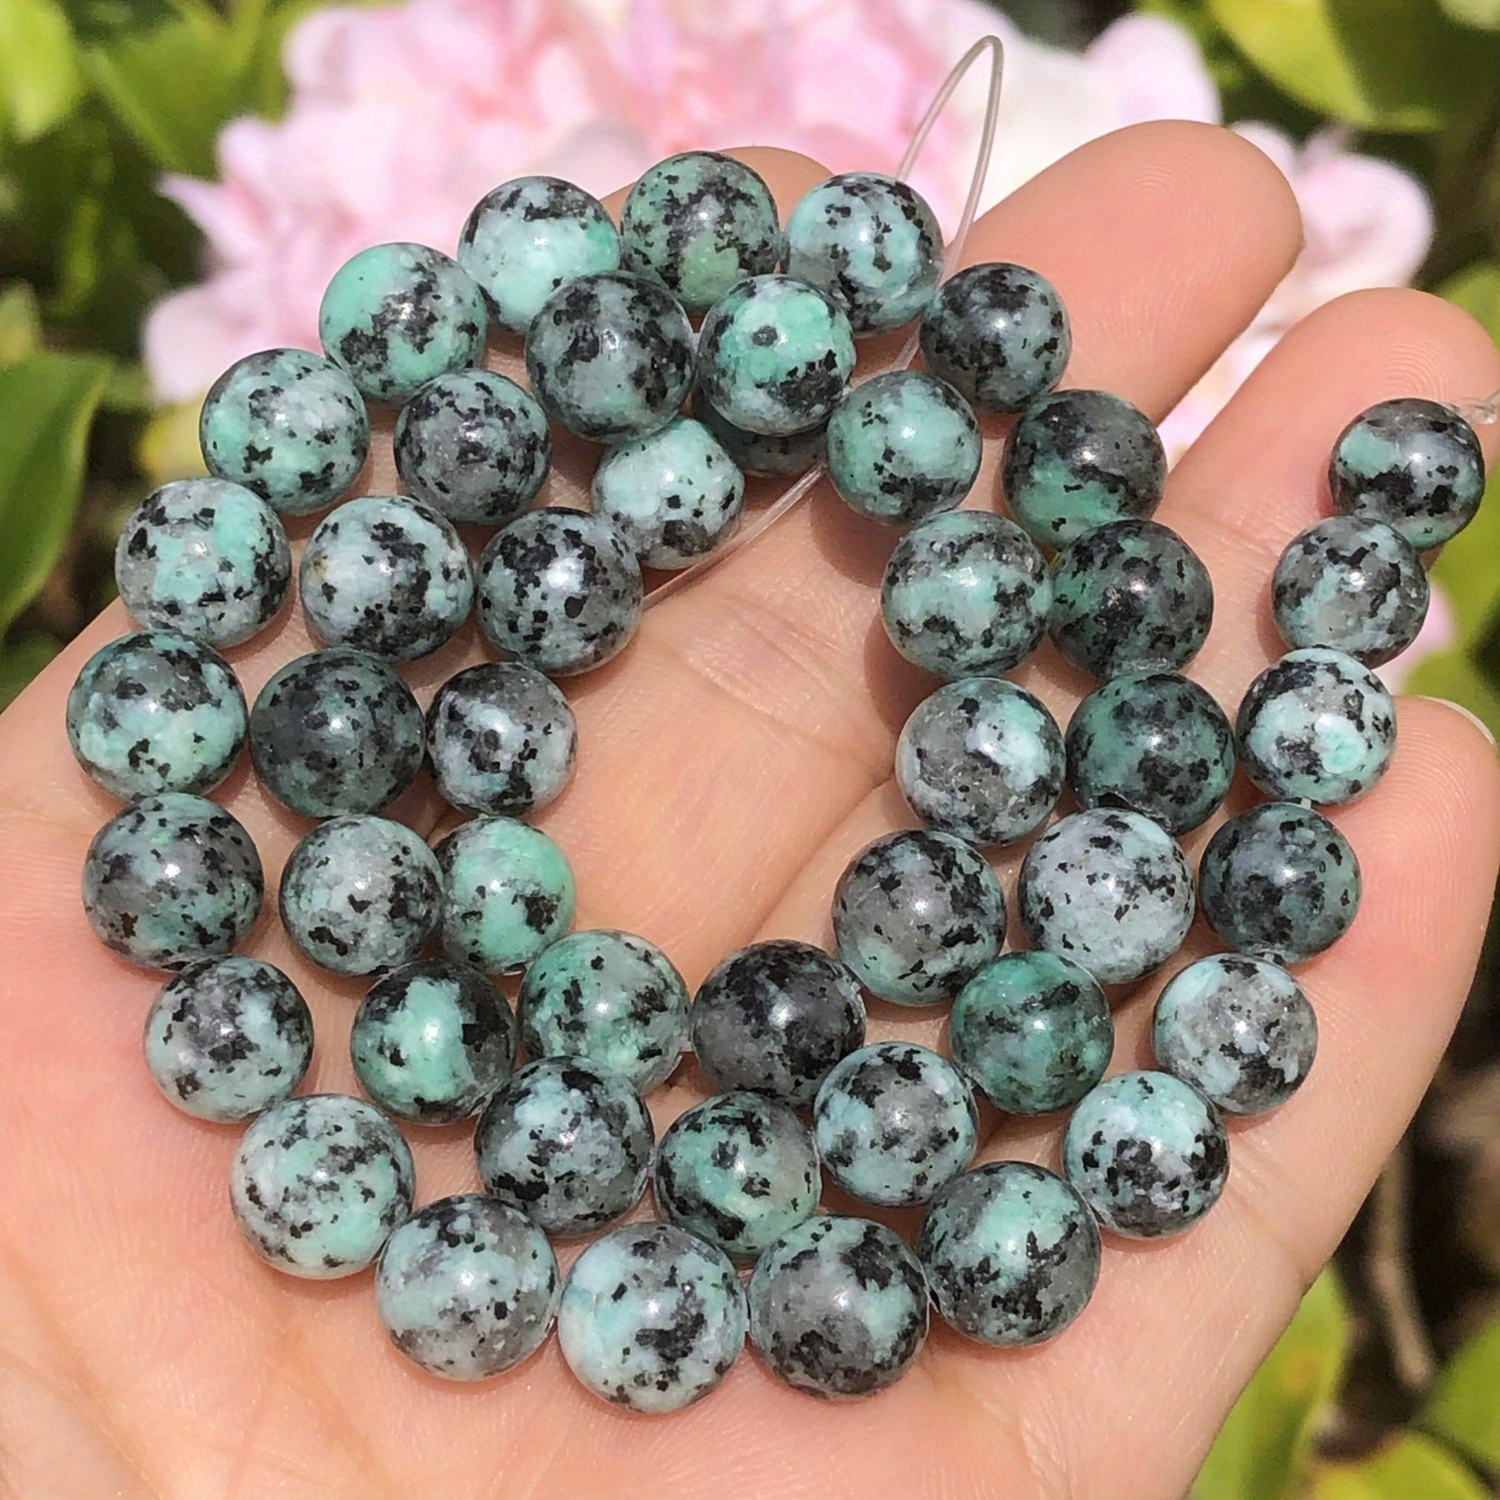  8mm Blue Turquoise Beads Round Gemstone Loose Beads for Jewelry  Making (46-48pcs/strand)